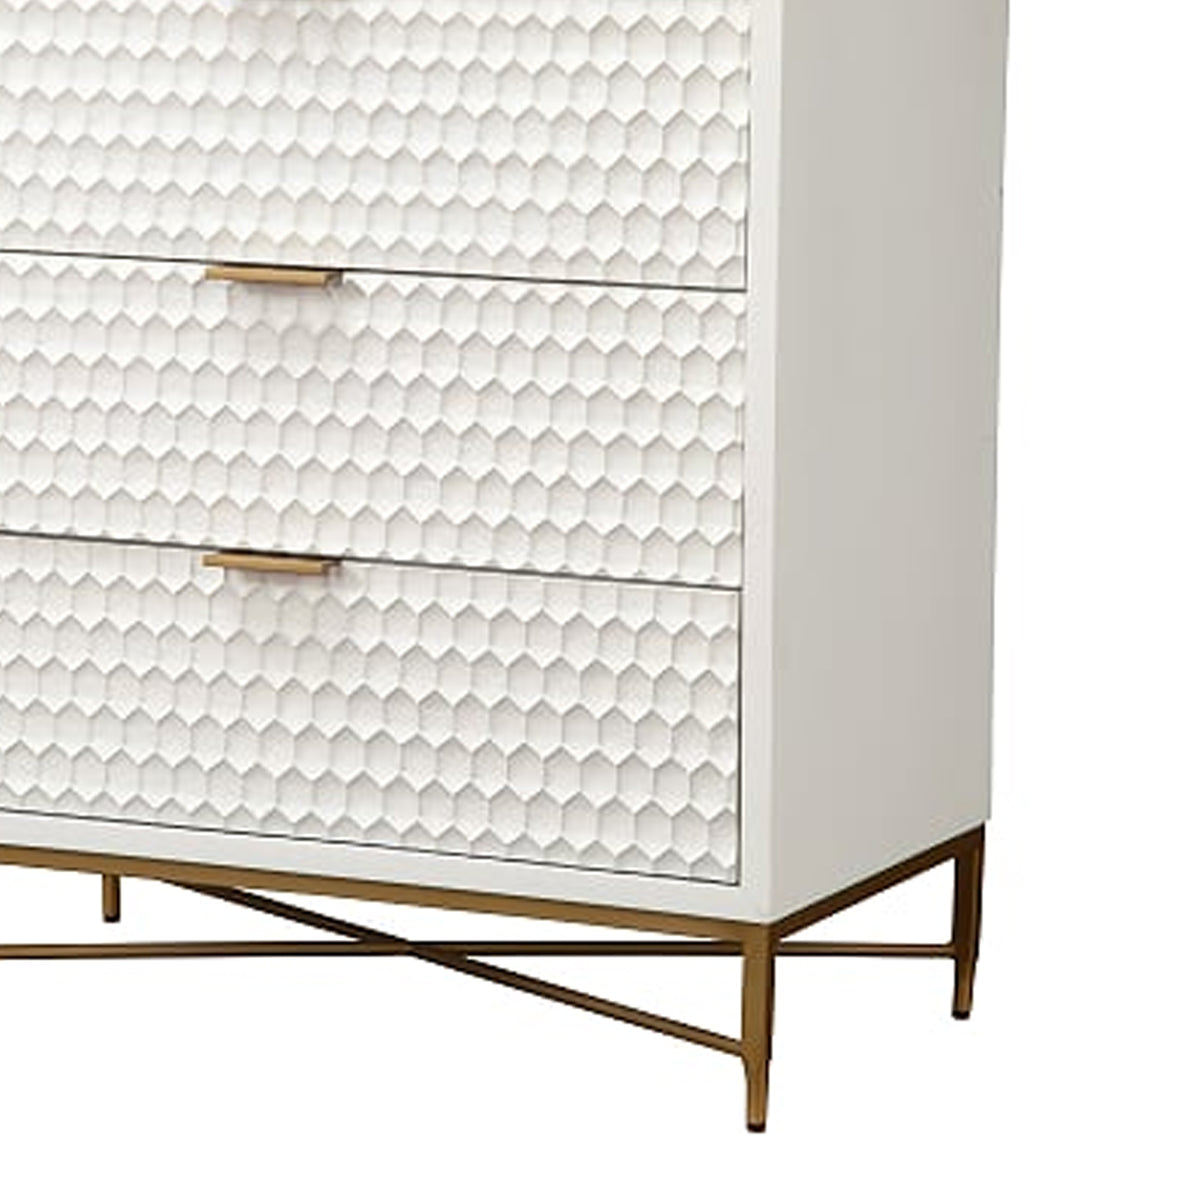 Honeycomb Design 3 Drawer Chest with Metal Legs, Small, White - BM206687